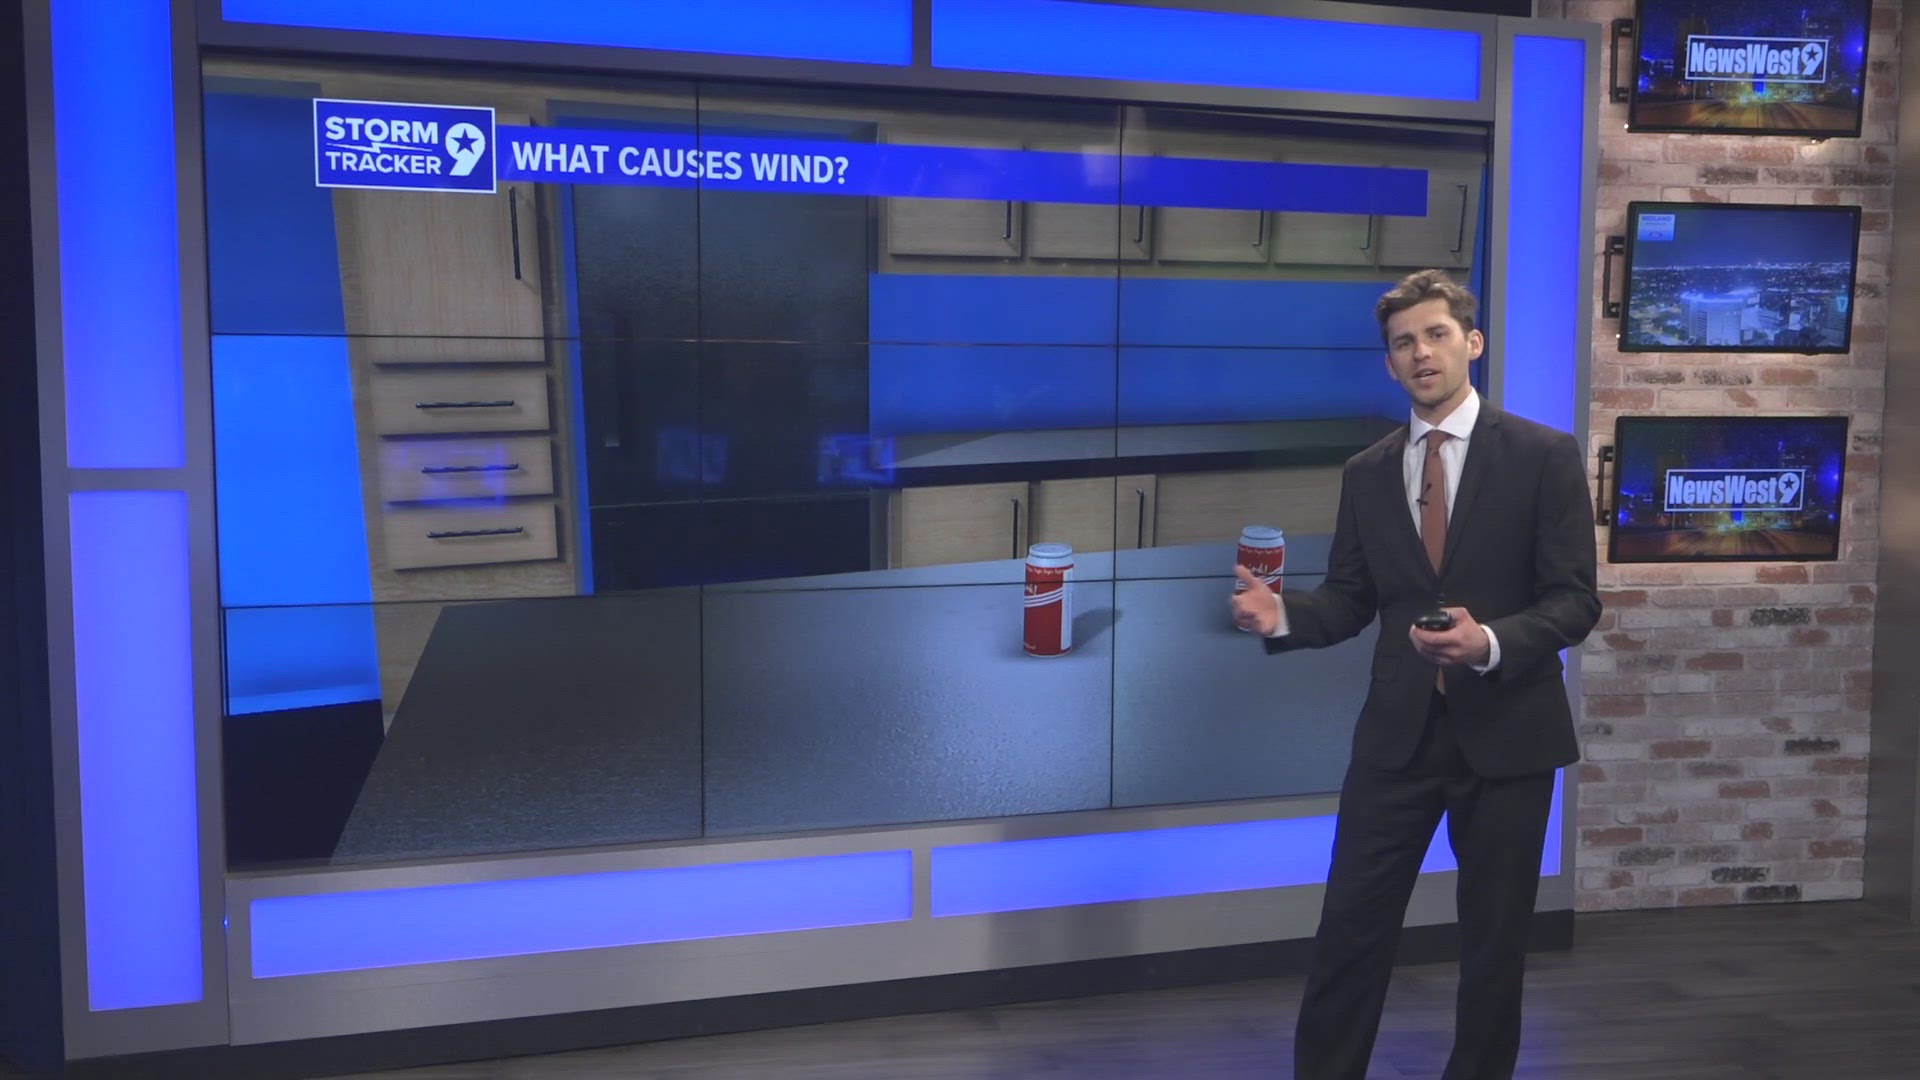 NewsWest 9 Meteorologist Dan Grigsby explains why the Permian Basin gets such powerful winds.